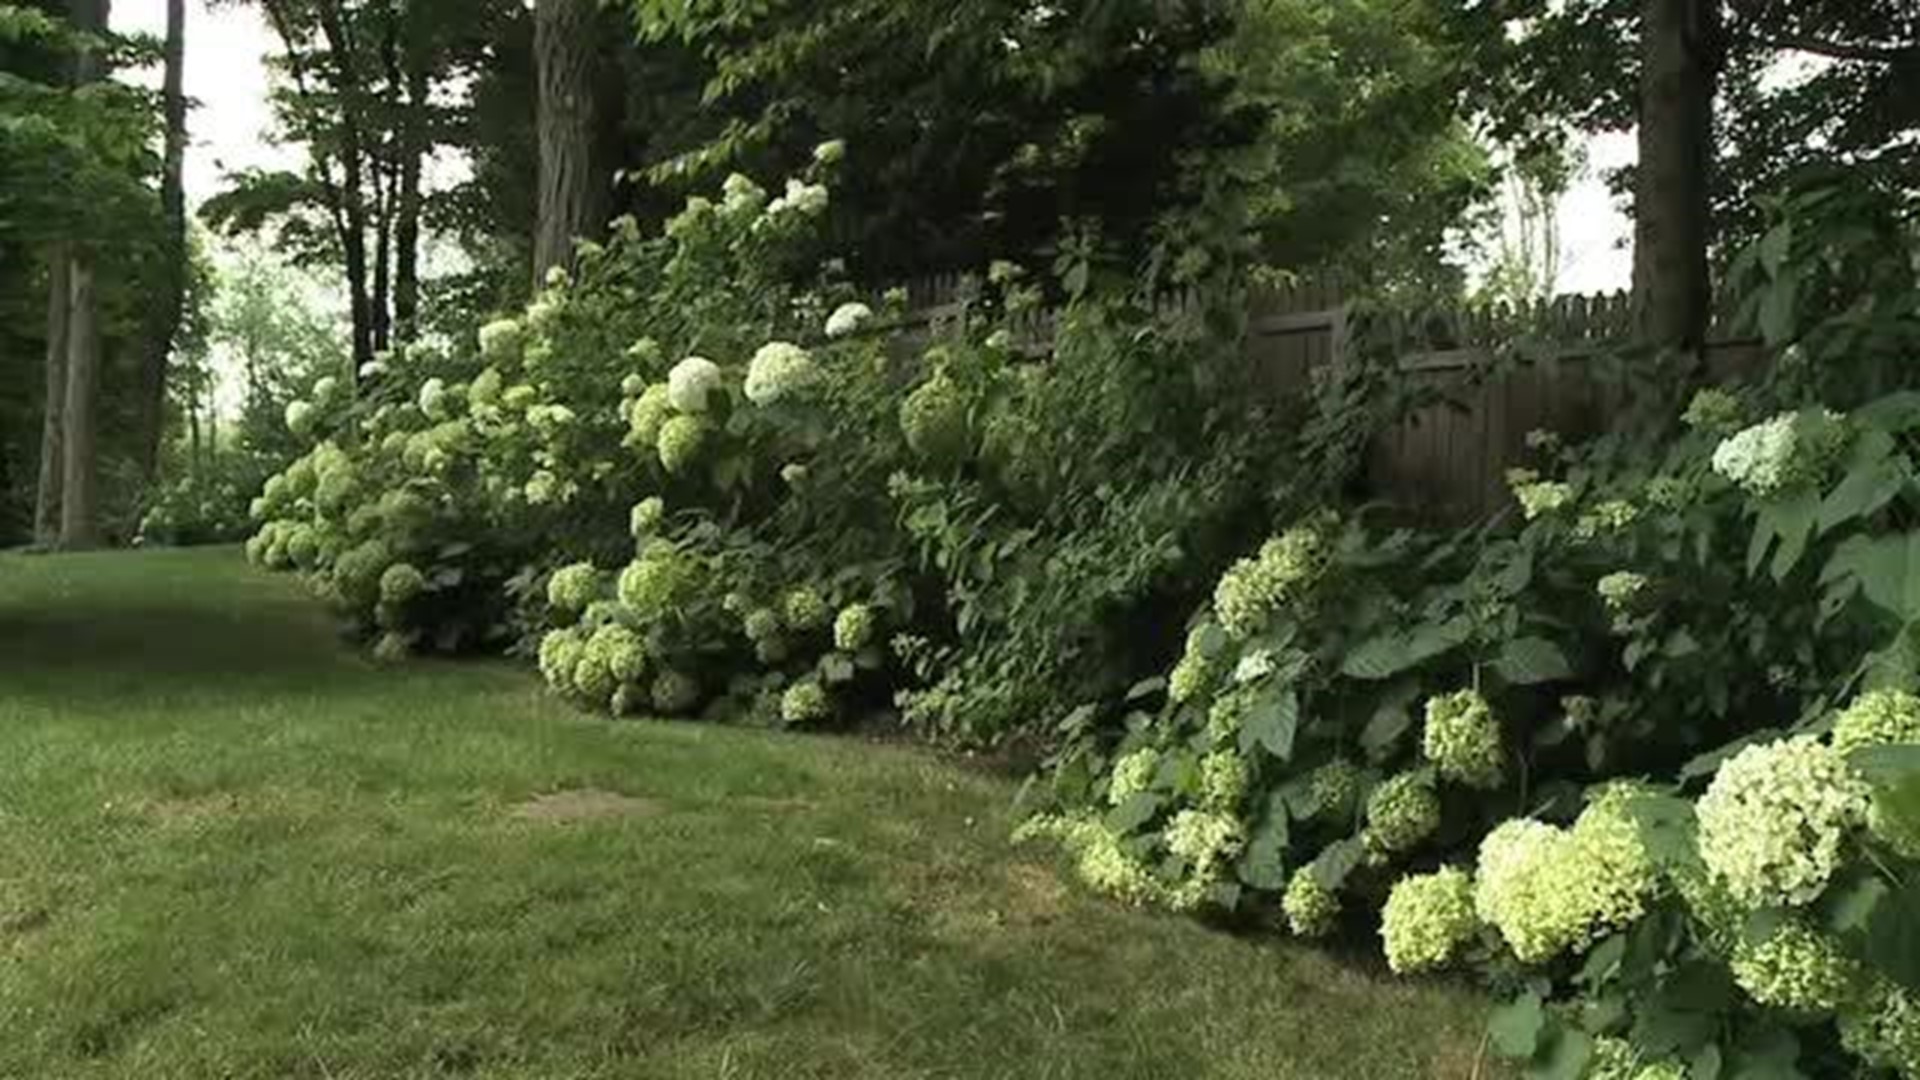 Landscaping with Hydrangeas (Part 2)